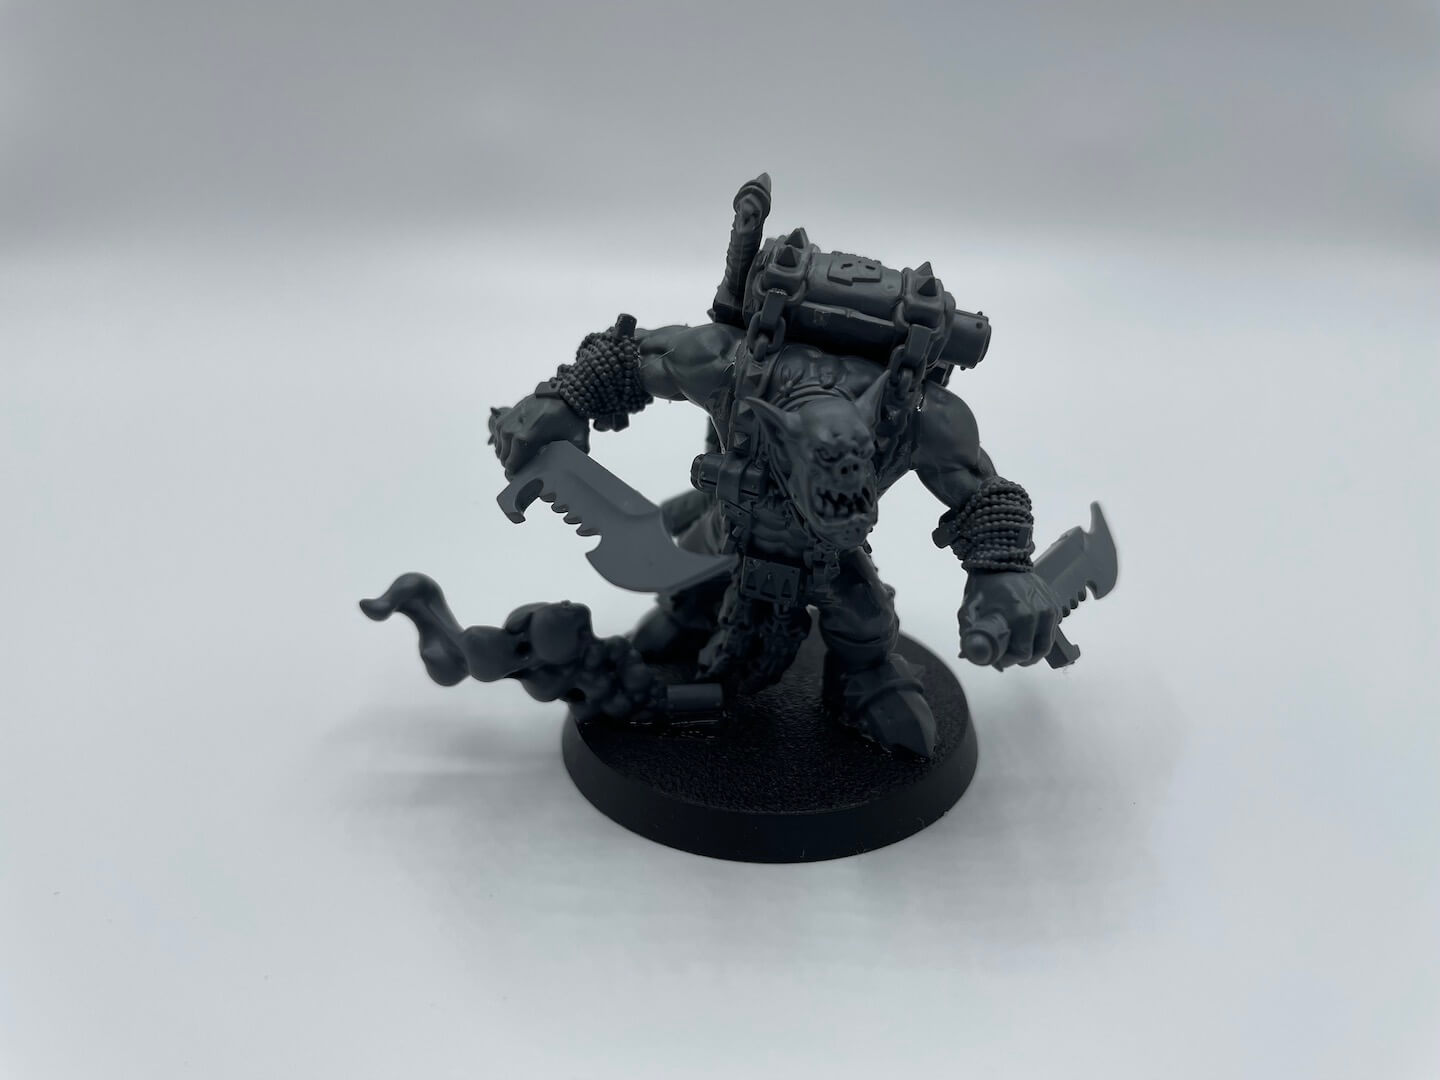 An image of Warhammer 40K Boarding Patrol unit Boss Snikrot, a sneaky Ork with a gun and blade